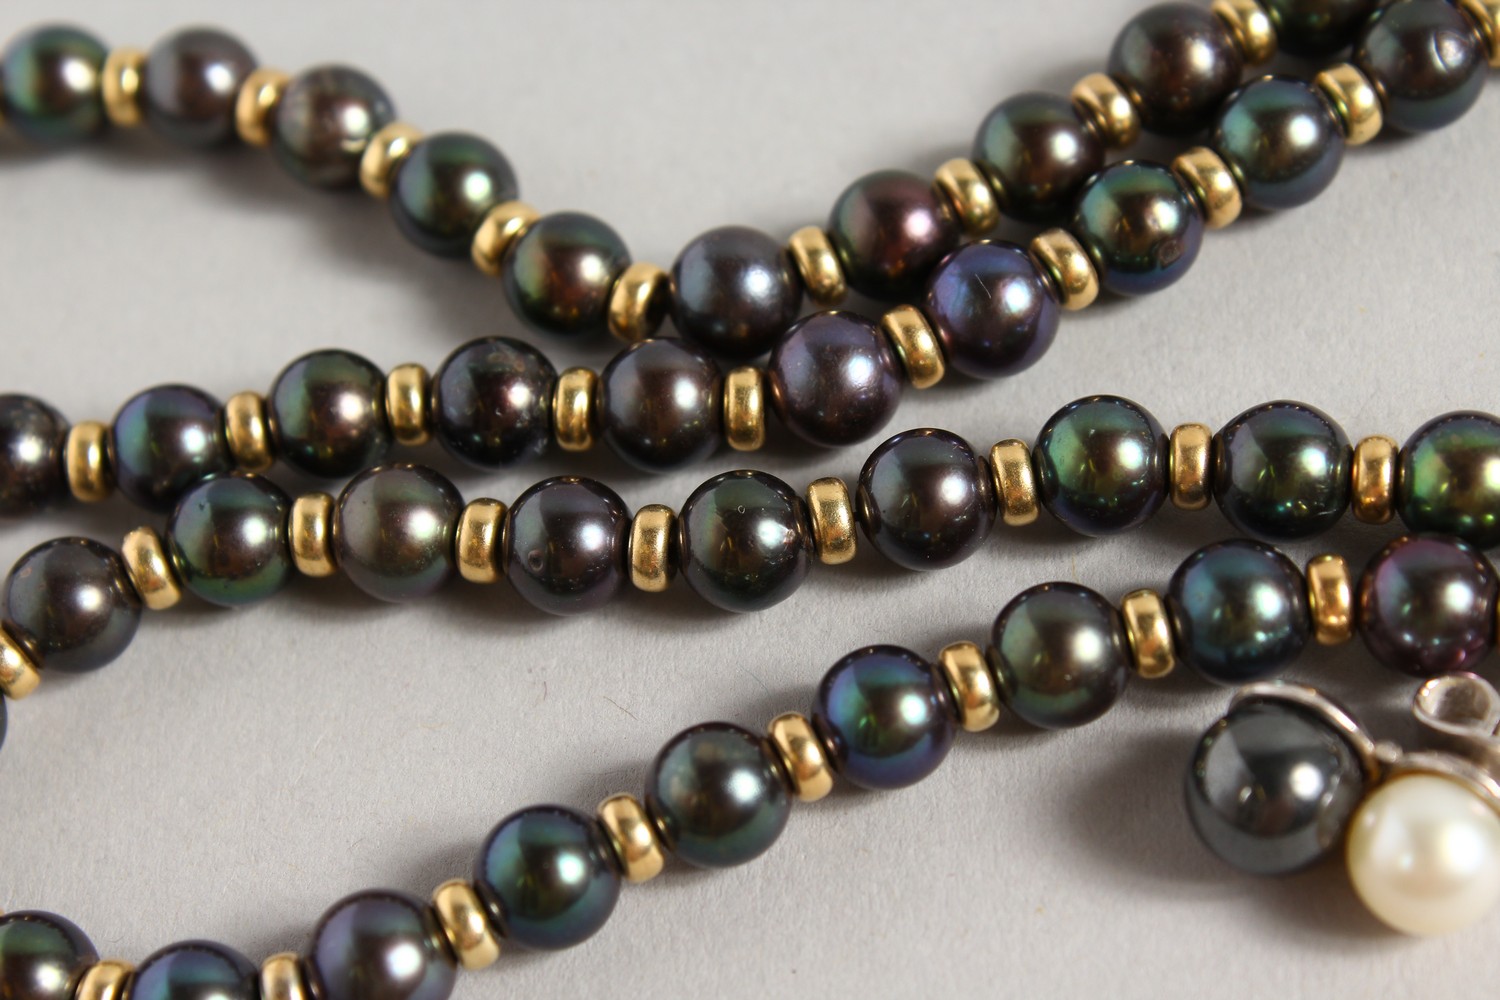 A GOOD BLACK PEARL NECKLACE, with ornate gold and diamond clasp, with a pair of similar earrings. - Image 5 of 5